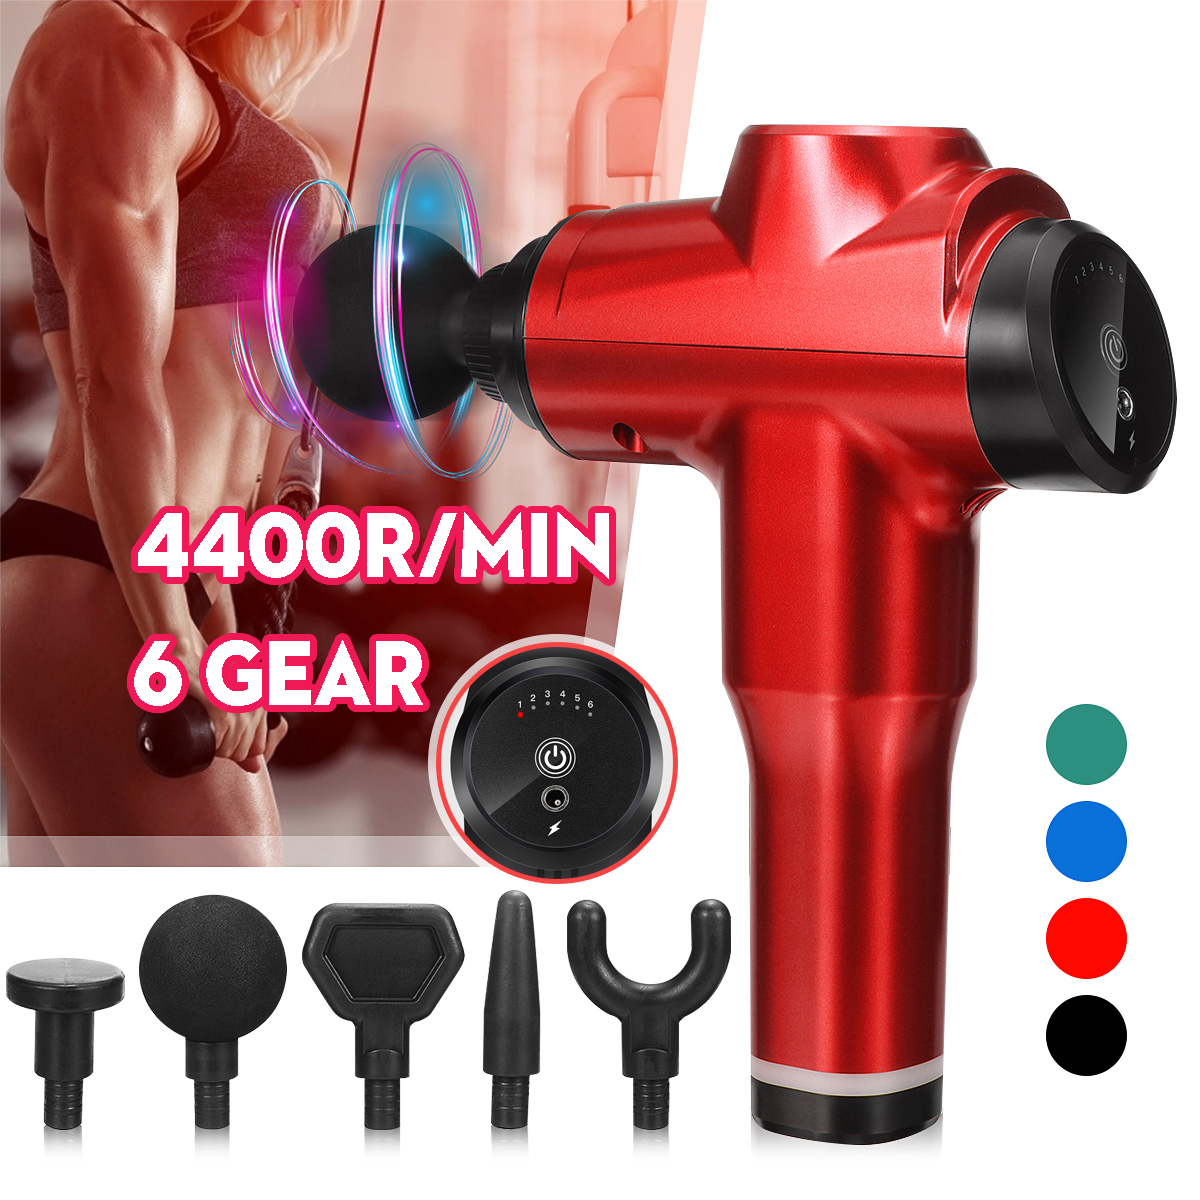 3600mAh-6-Gears-Electric-Percussion-Massager-Deep-Muscle-Vibration-Relaxing-Device-With-5-Heads-1687929-2